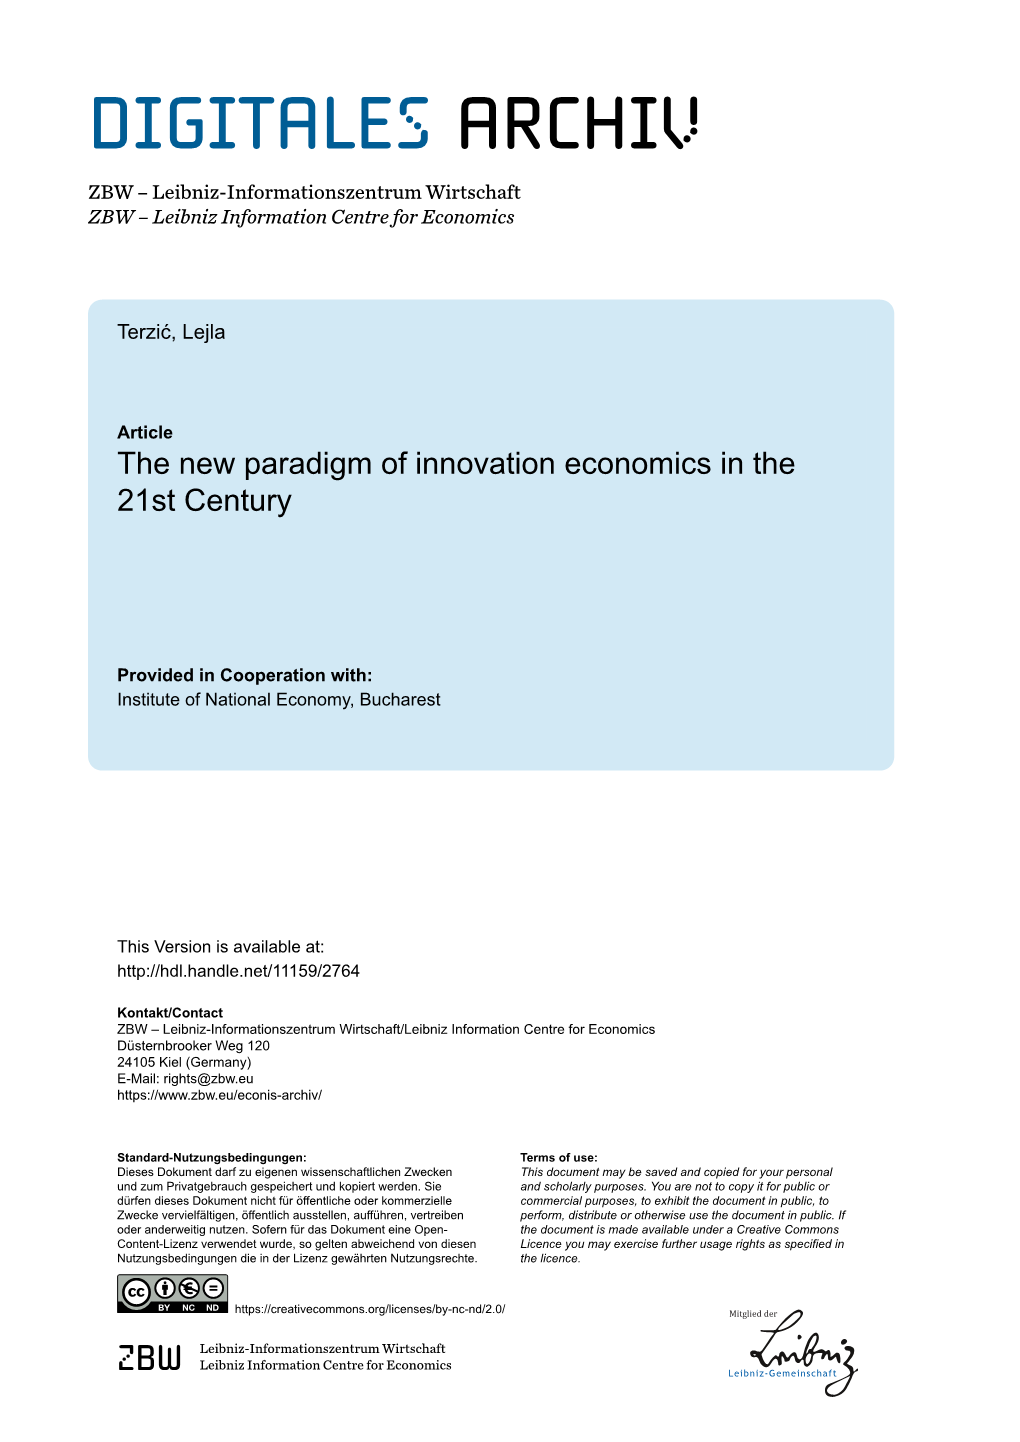 The New Paradigm of Innovation Economics in the 21St Century